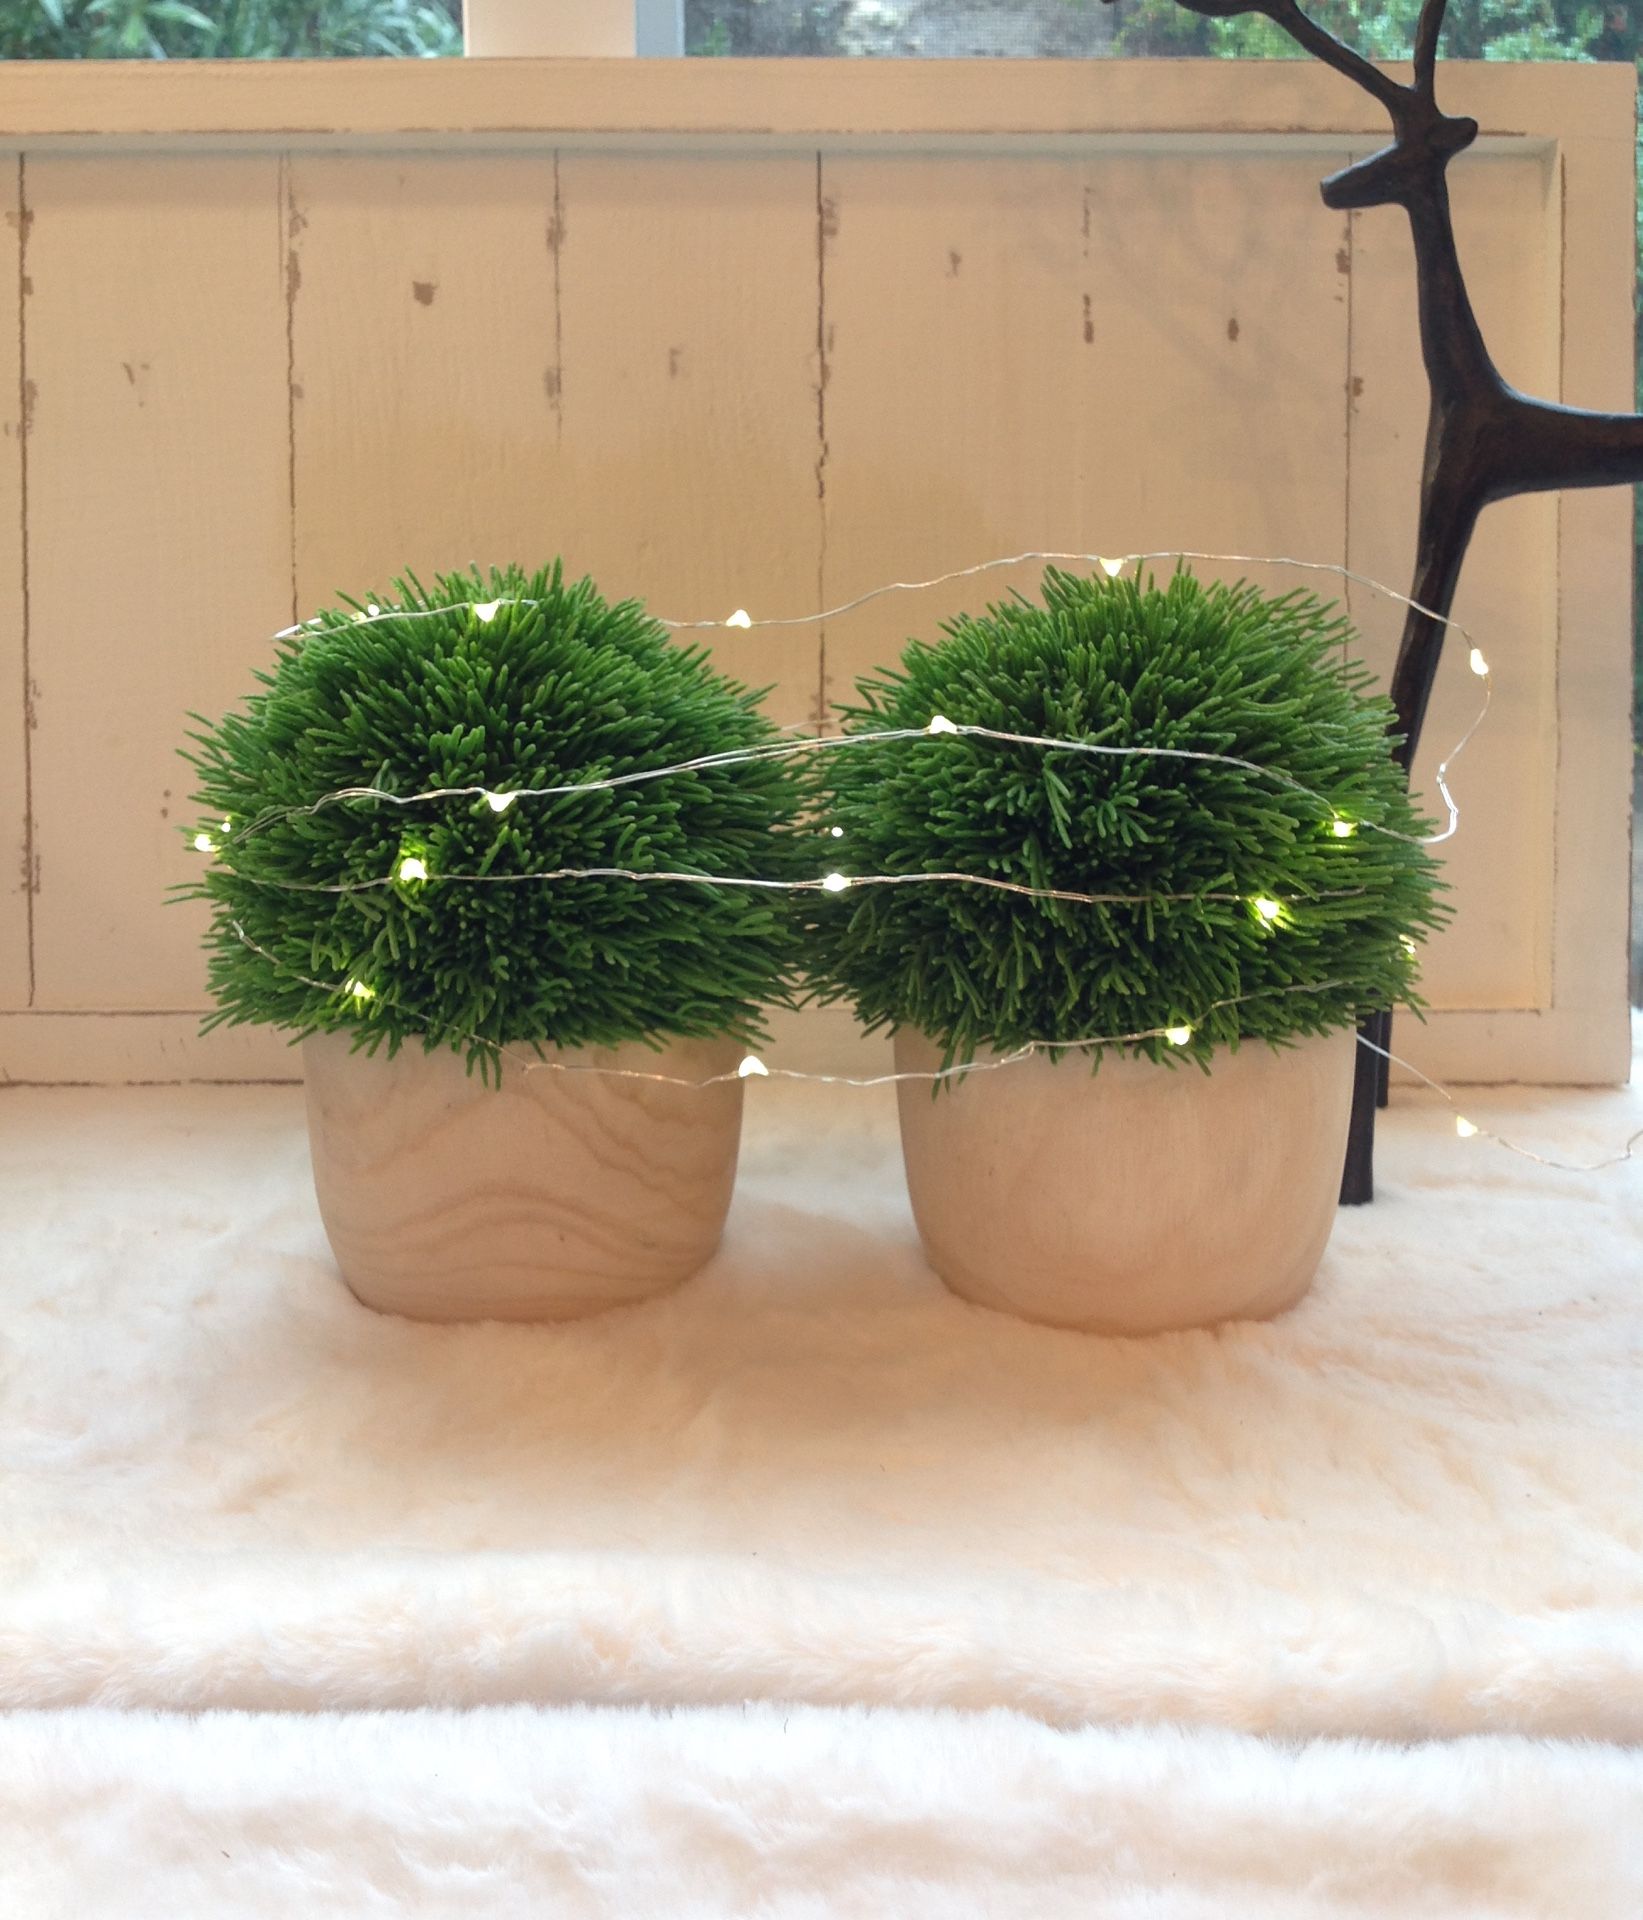 NEW TWO EVERGREEN ROUND FORM TOPIARY IN LIGHT WOOD POTS